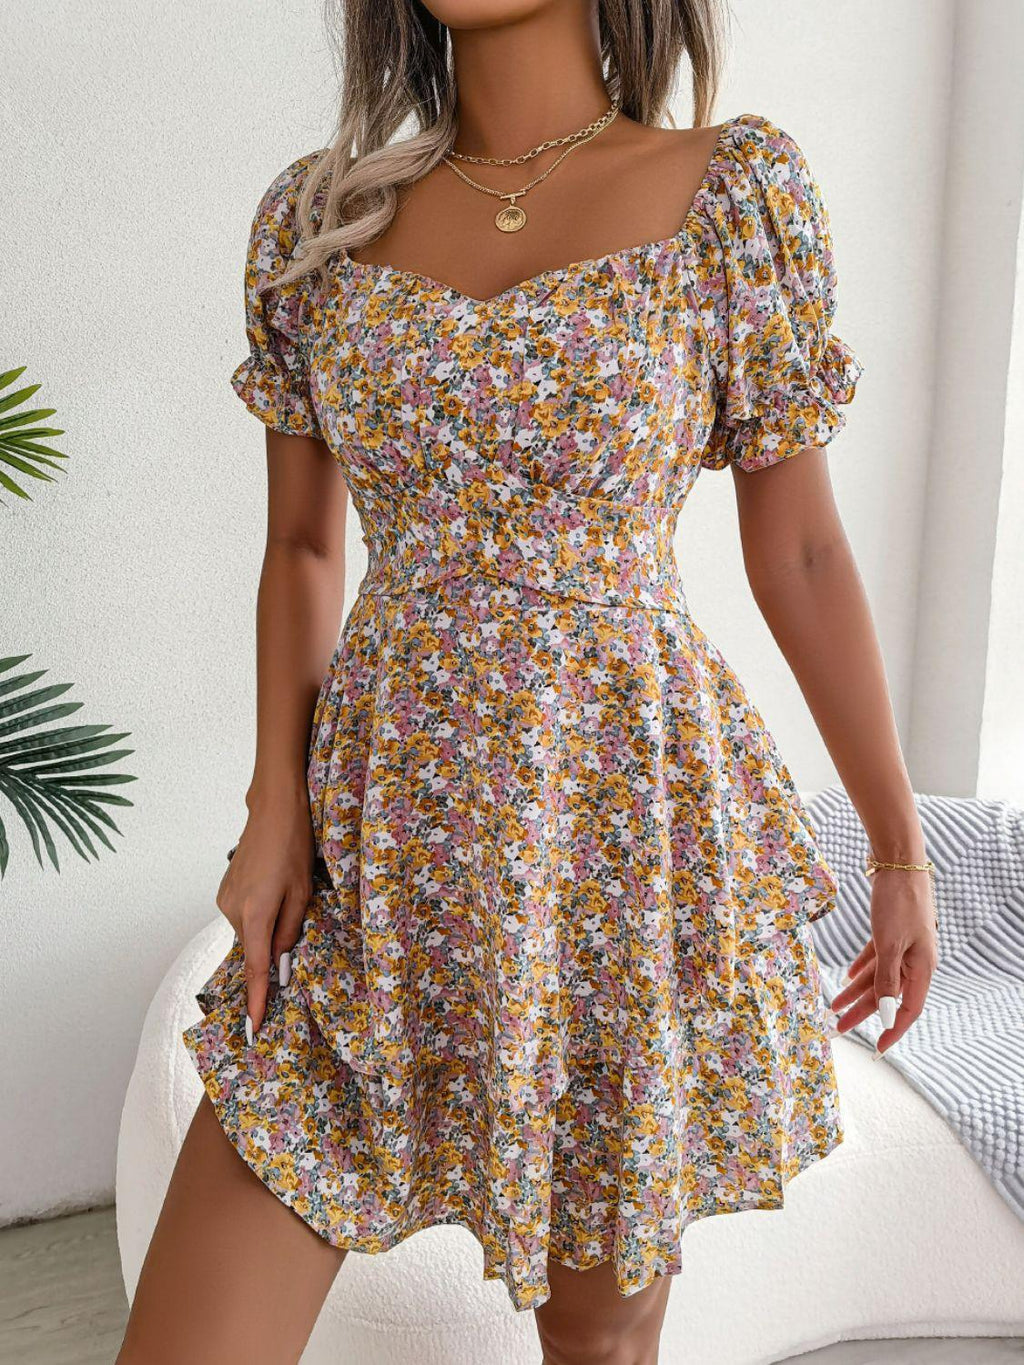 Urban Bliss sweetheart neck dress in lilac floral